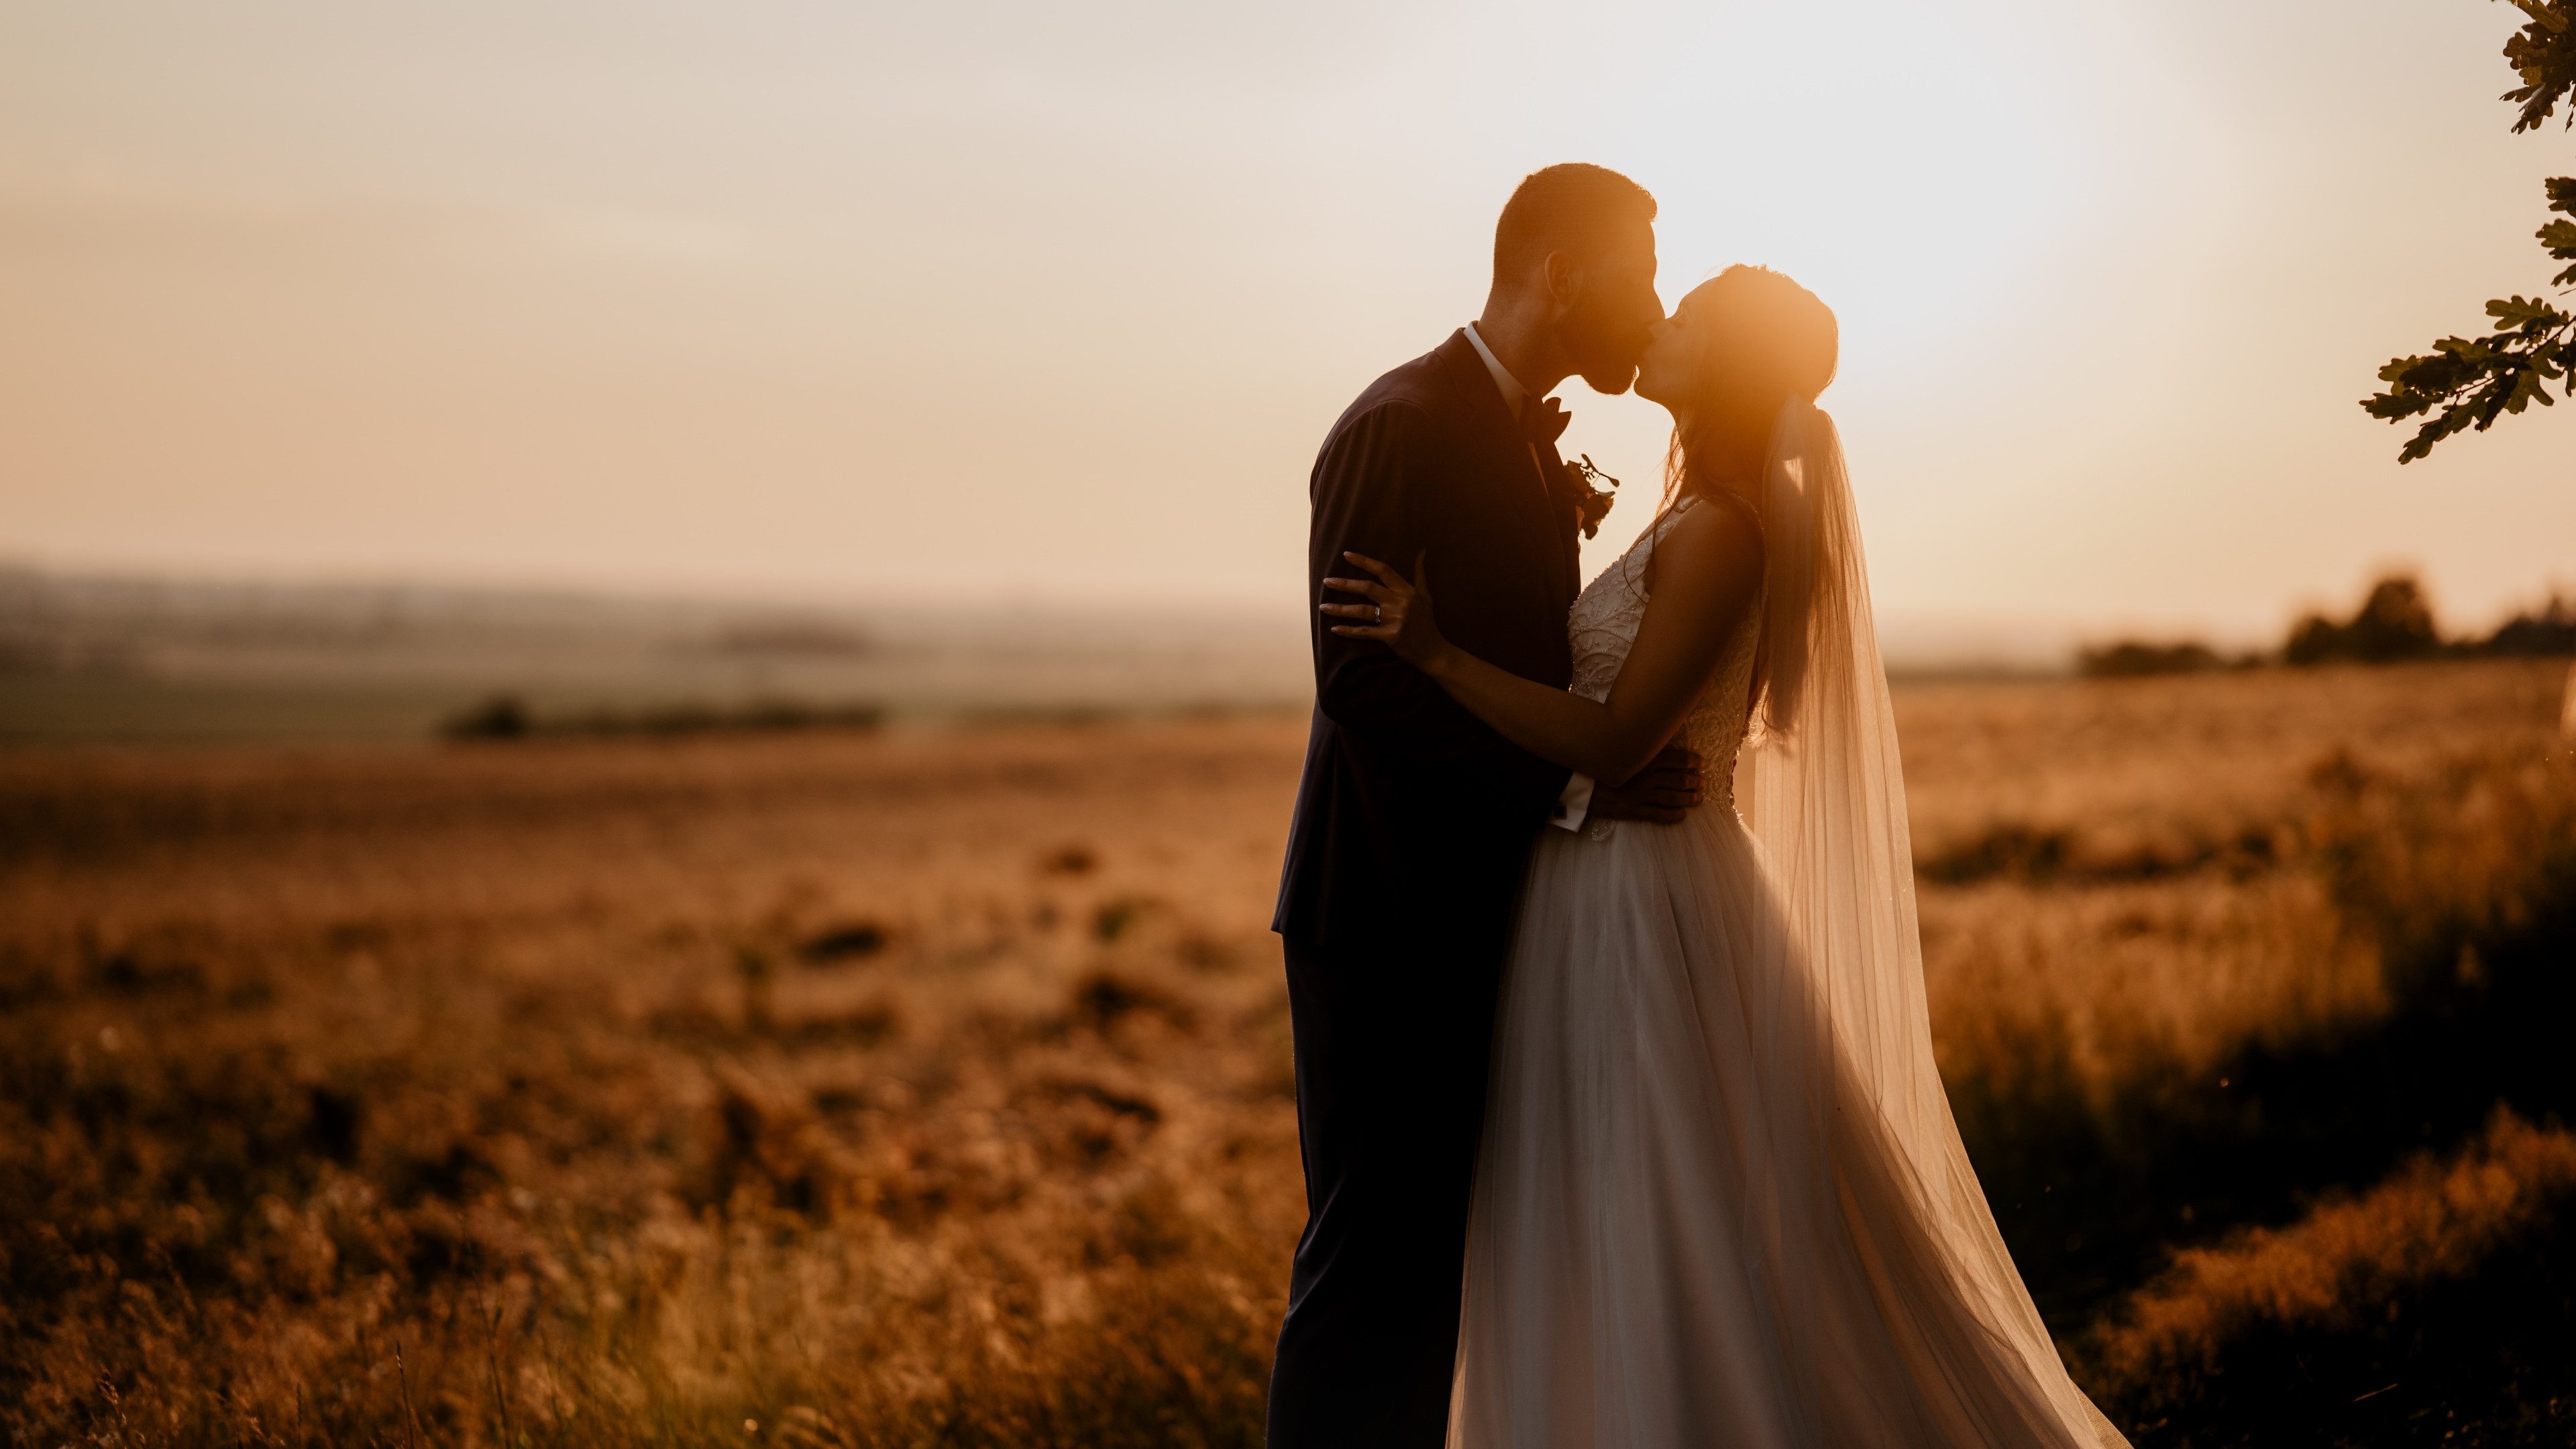 A newly married couple kiss at sunset.